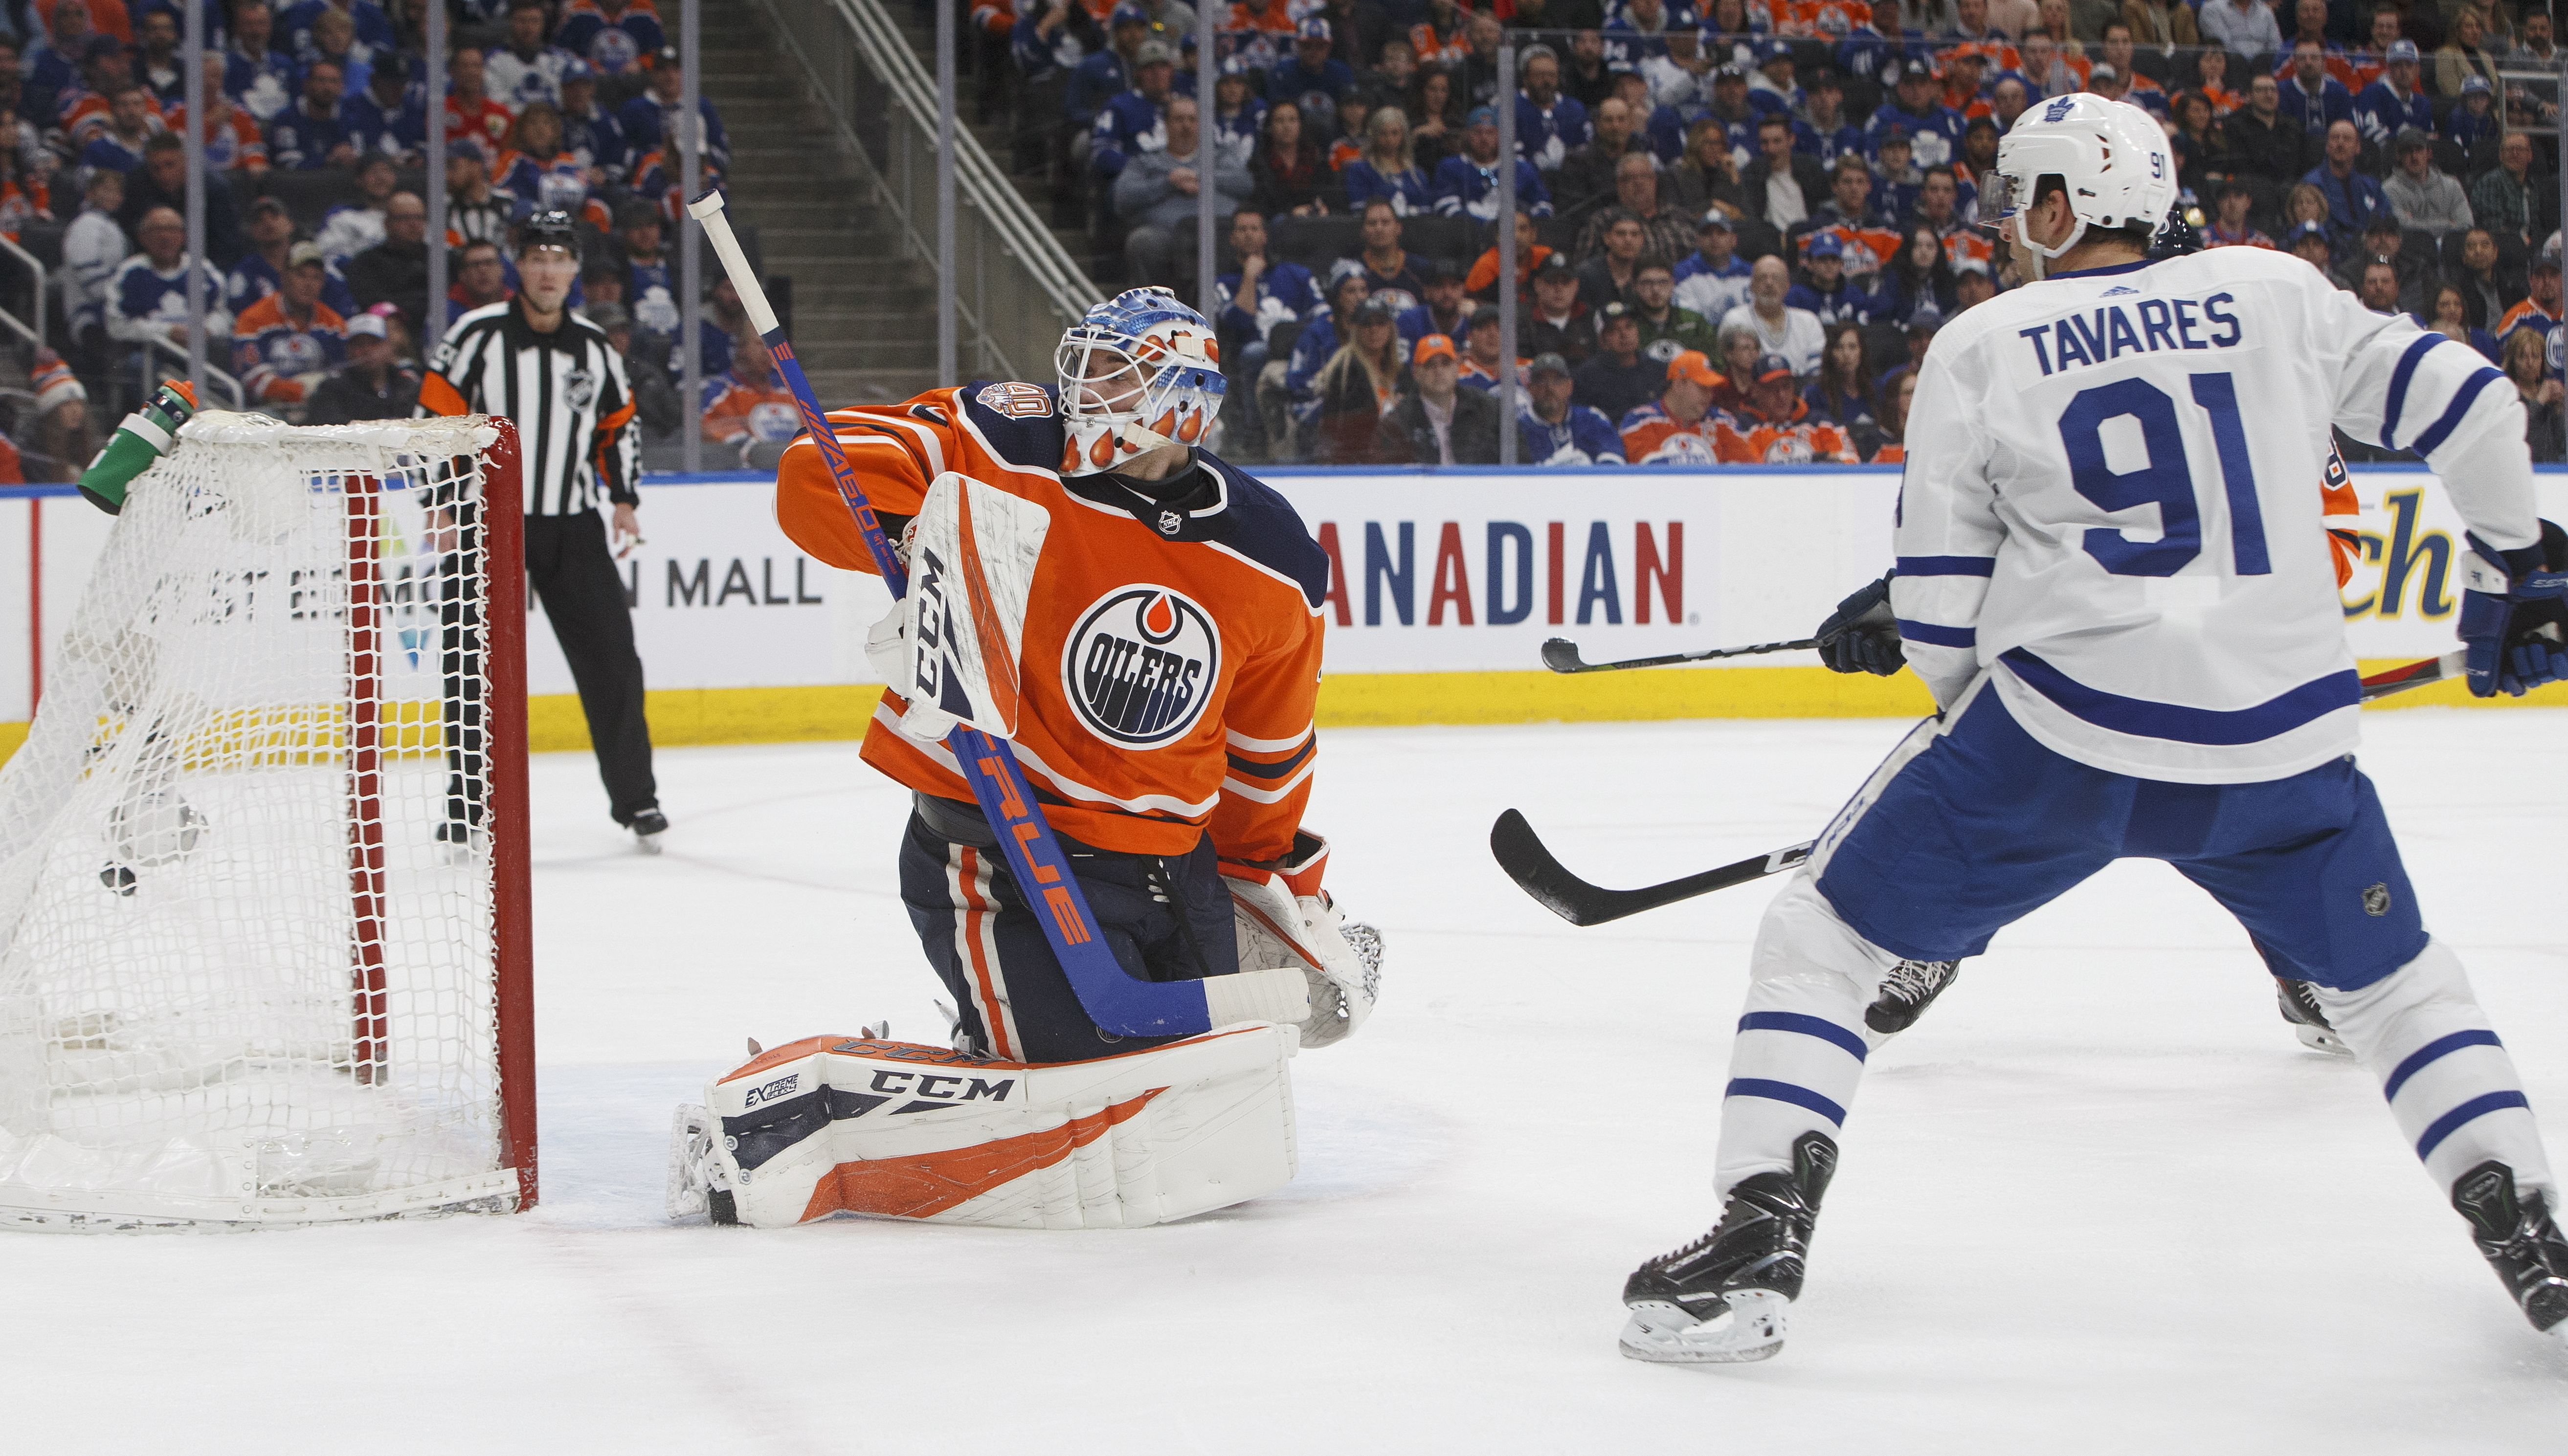 Tavares has goal, 2 assists to help Maple Leafs beat Oilers